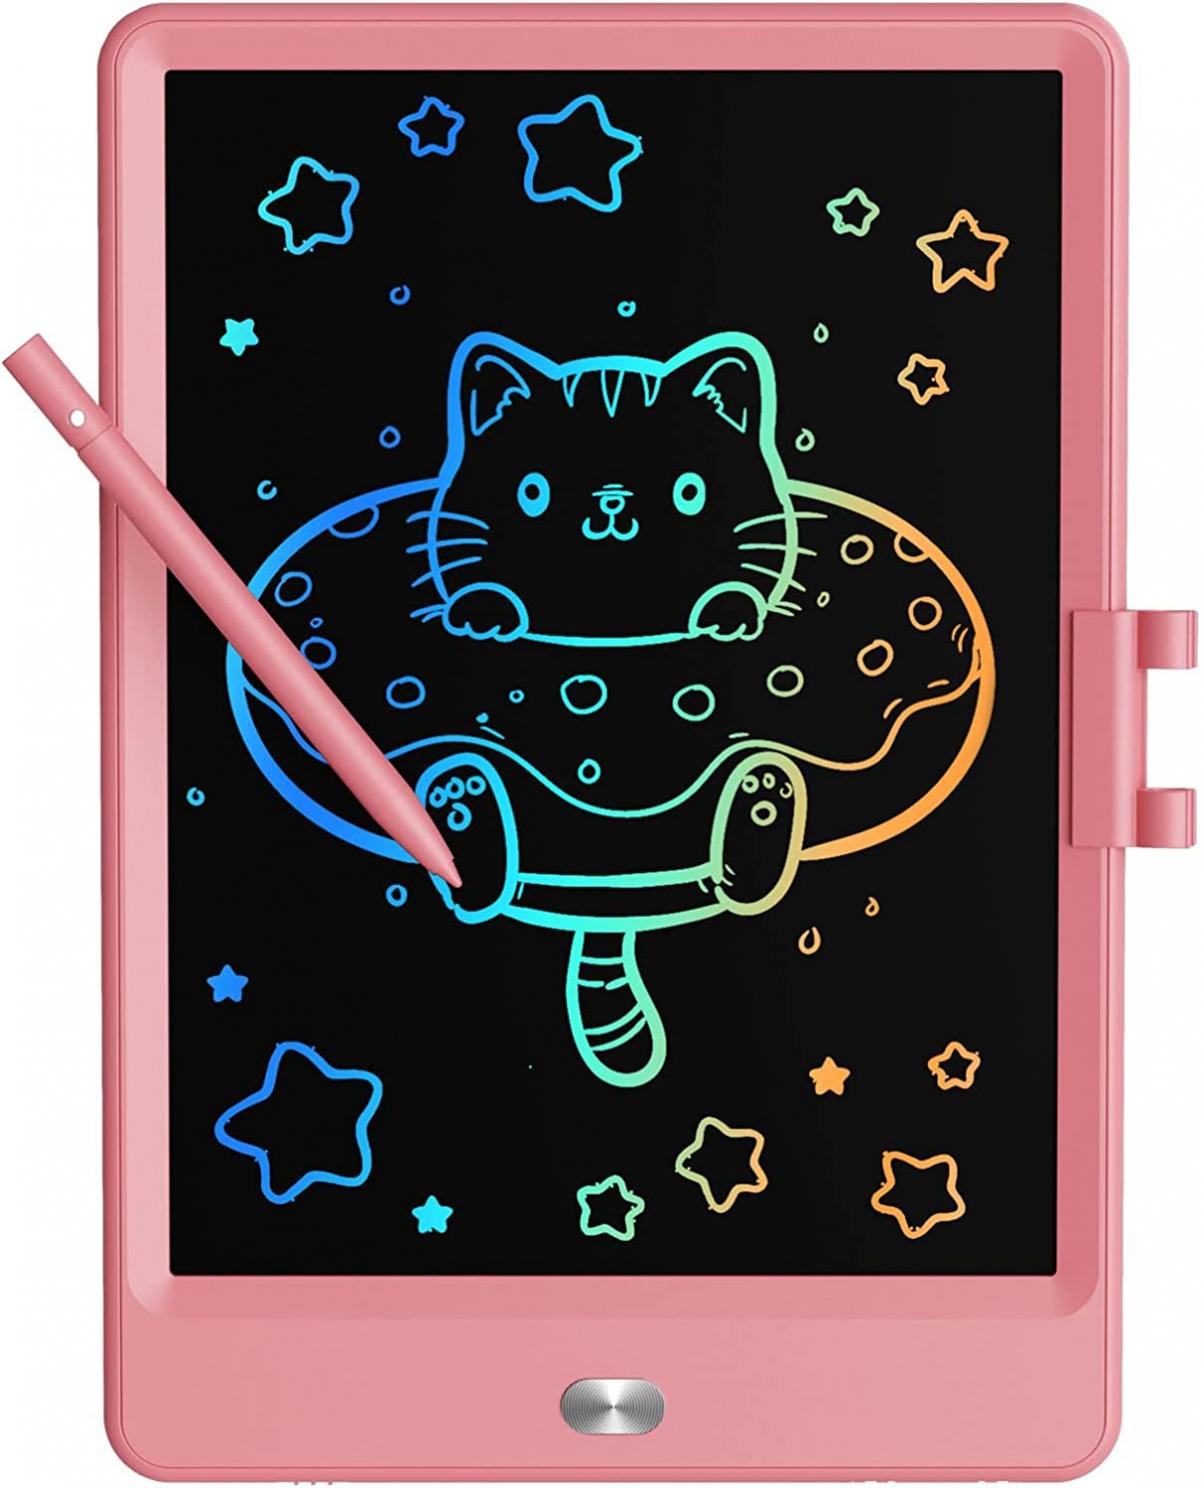 TEKFUN LCD Writing Tablet Doodle Board, 8.5inch Colorful Drawing Tablet Writing Pad, Kids Gifts Toys for 3 4 5 6 7 Year Old Kids, Erasable Doodle Pad Toddler Travel Car Toy Road Trip Activity (Pink)